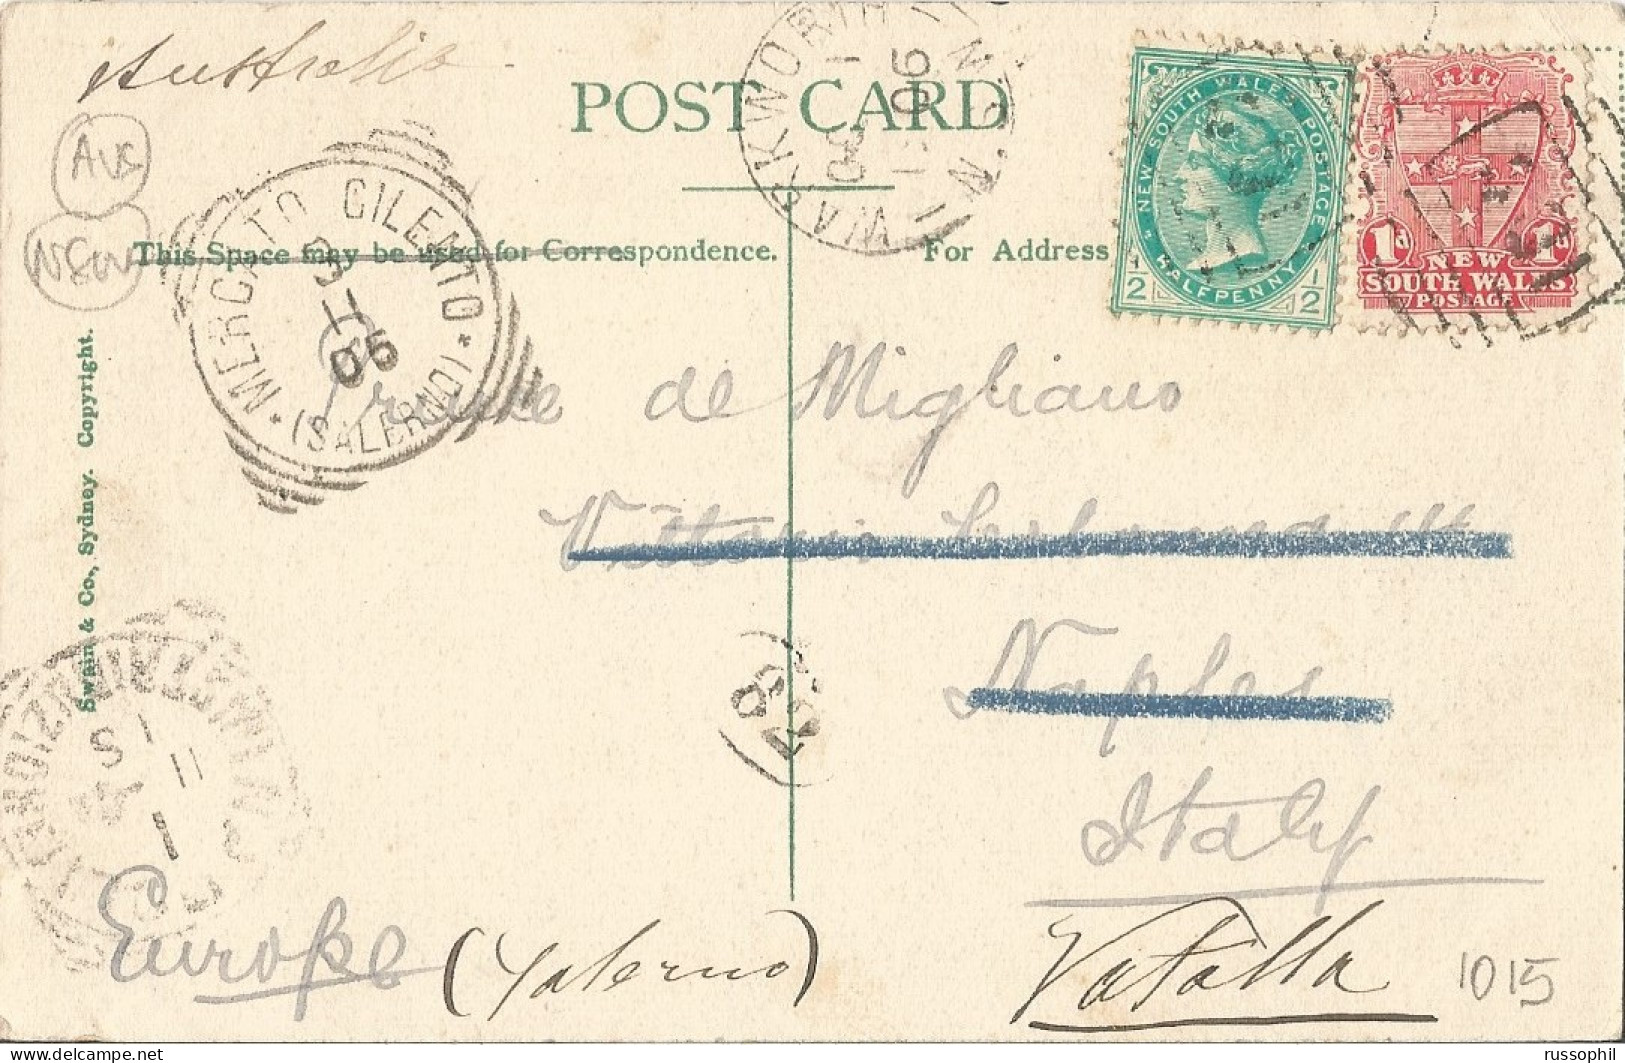 AUSTRALIA NSW - FRANKED PC (VIEW OF SYDNEY) FROM WARKWORTH TO ITALY - BARRED NUMERAL CANCEL 401 - 1905 - Cartas & Documentos